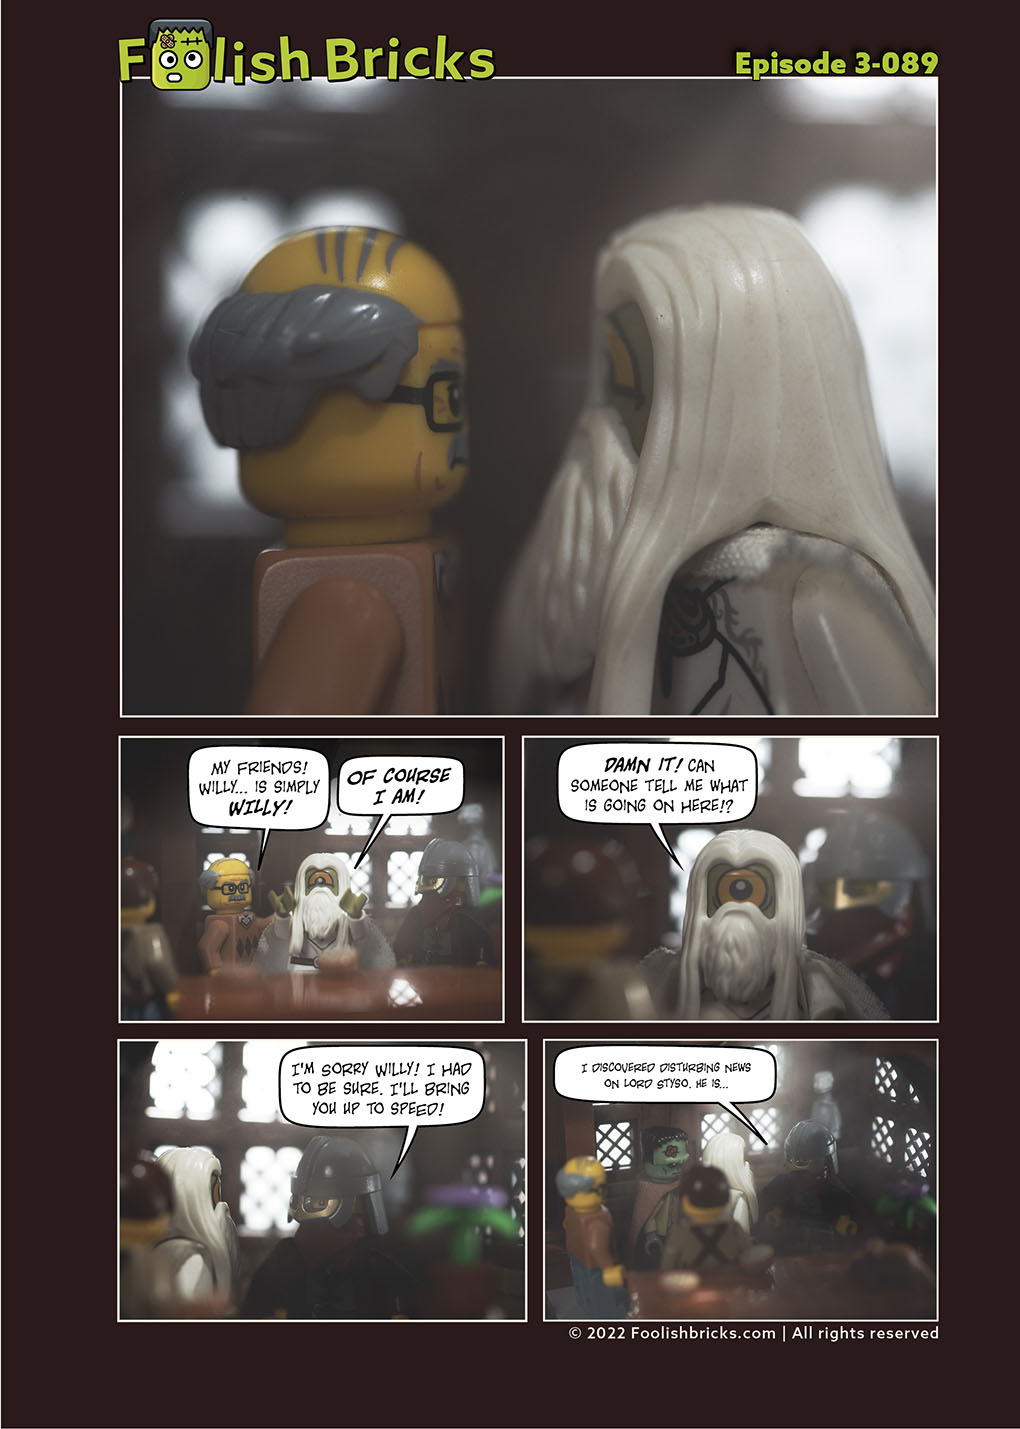 Lego Comic - Only Willy